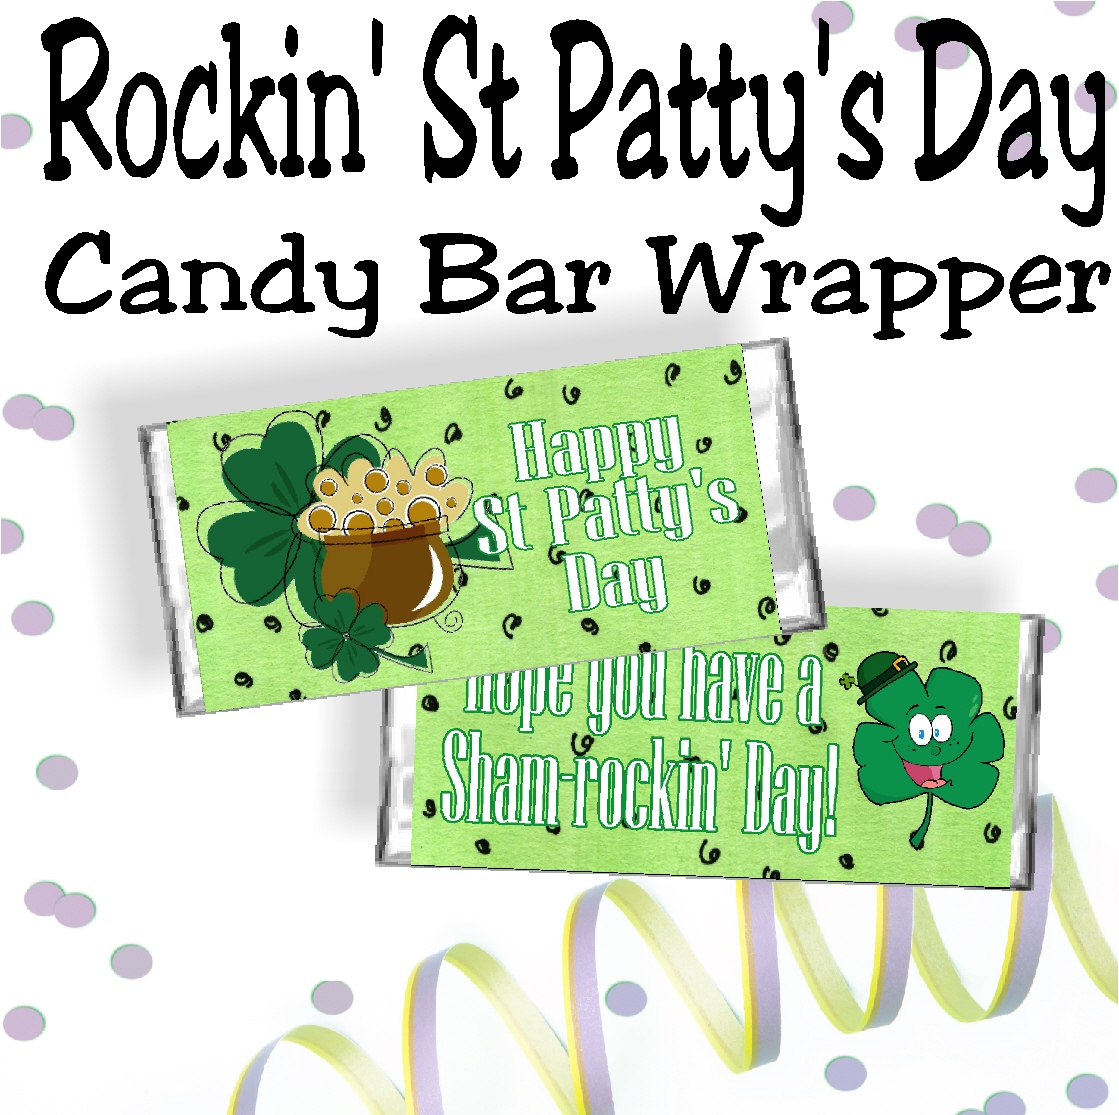 have-a-rockin-st-patrick-s-day-candy-bar-wrapper-free-printable